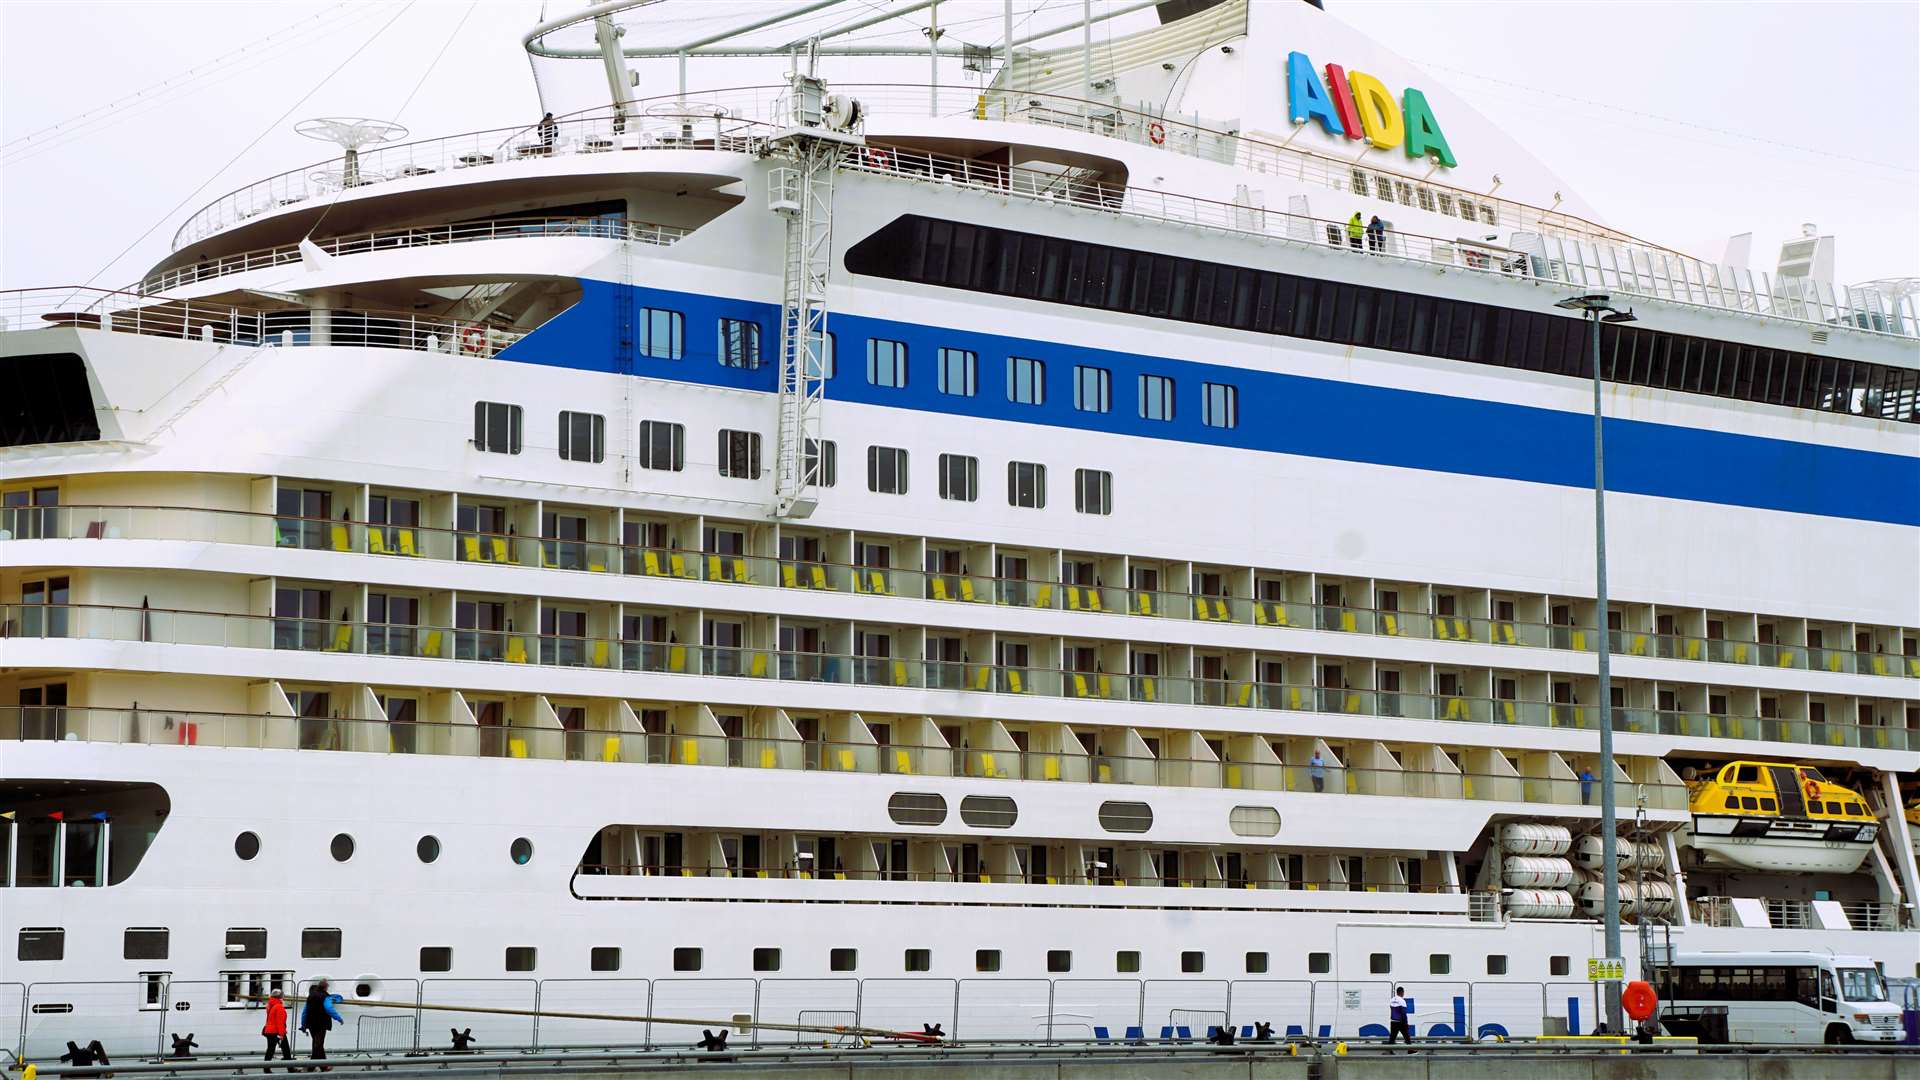 The huge cruise ship dwarfed all around it at Scrabster harbour. Picture: DGS